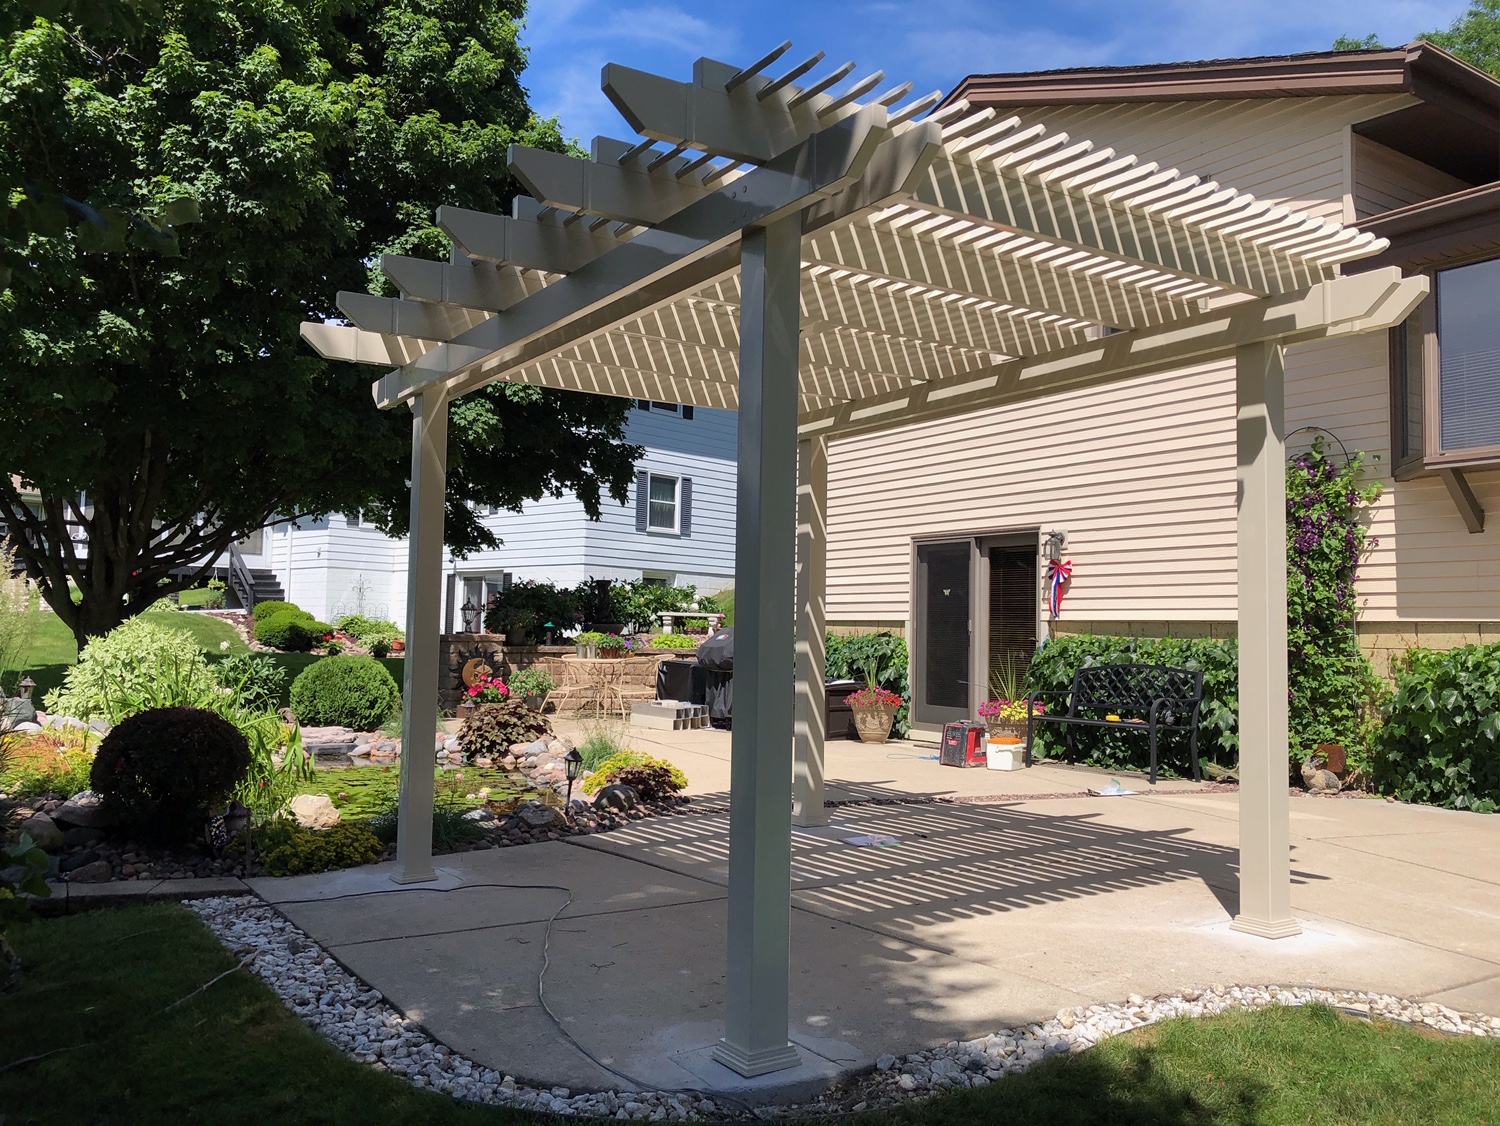 This shaded area has a tan pergola over top of a concrete slab. There isn’t any furniture below the pergola, and it isn’t attached to the home.